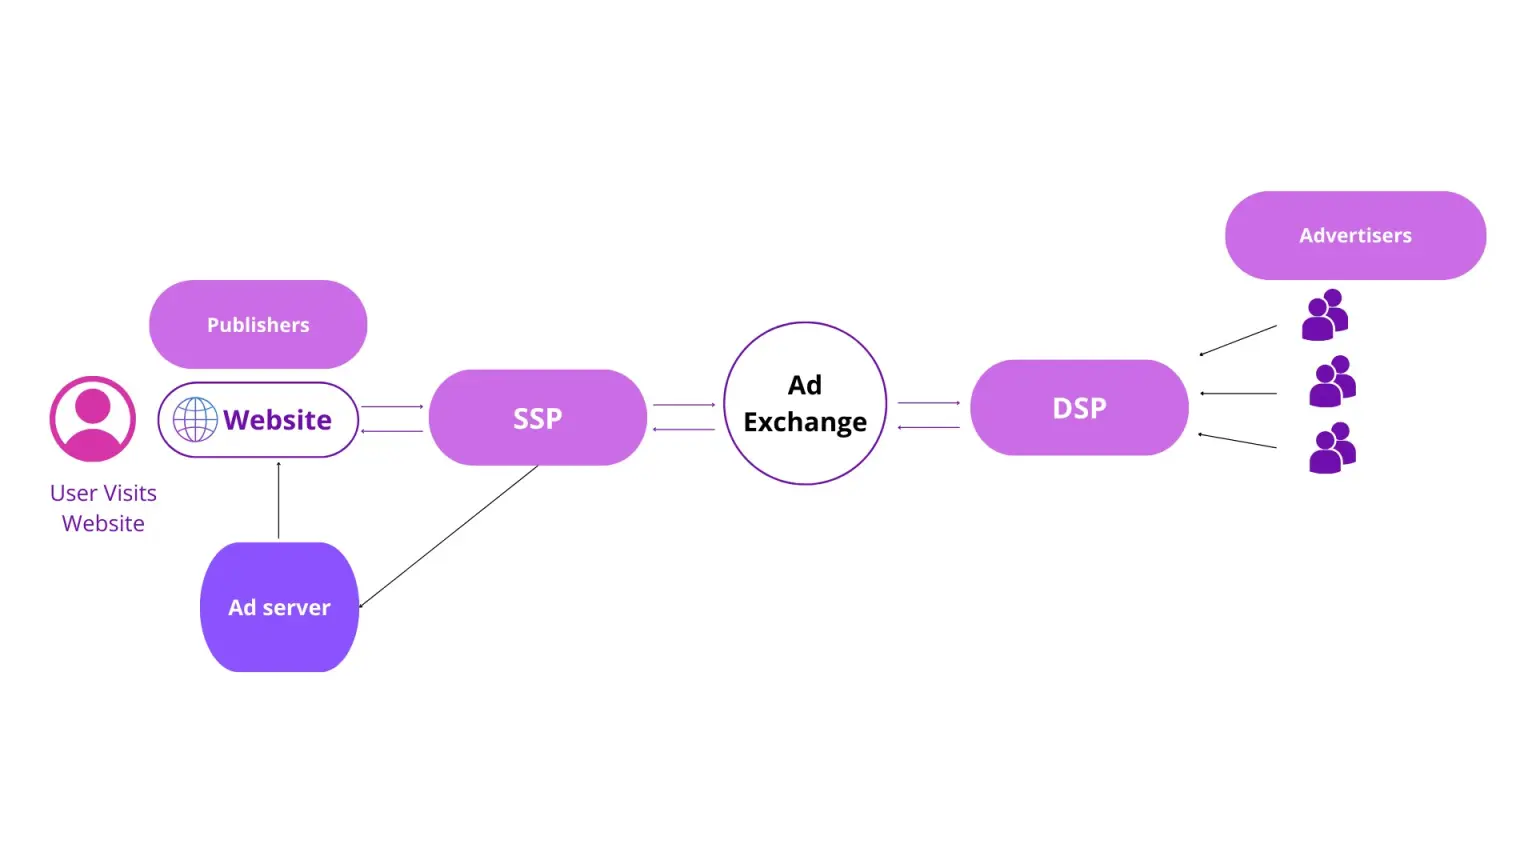 How ad exchange works